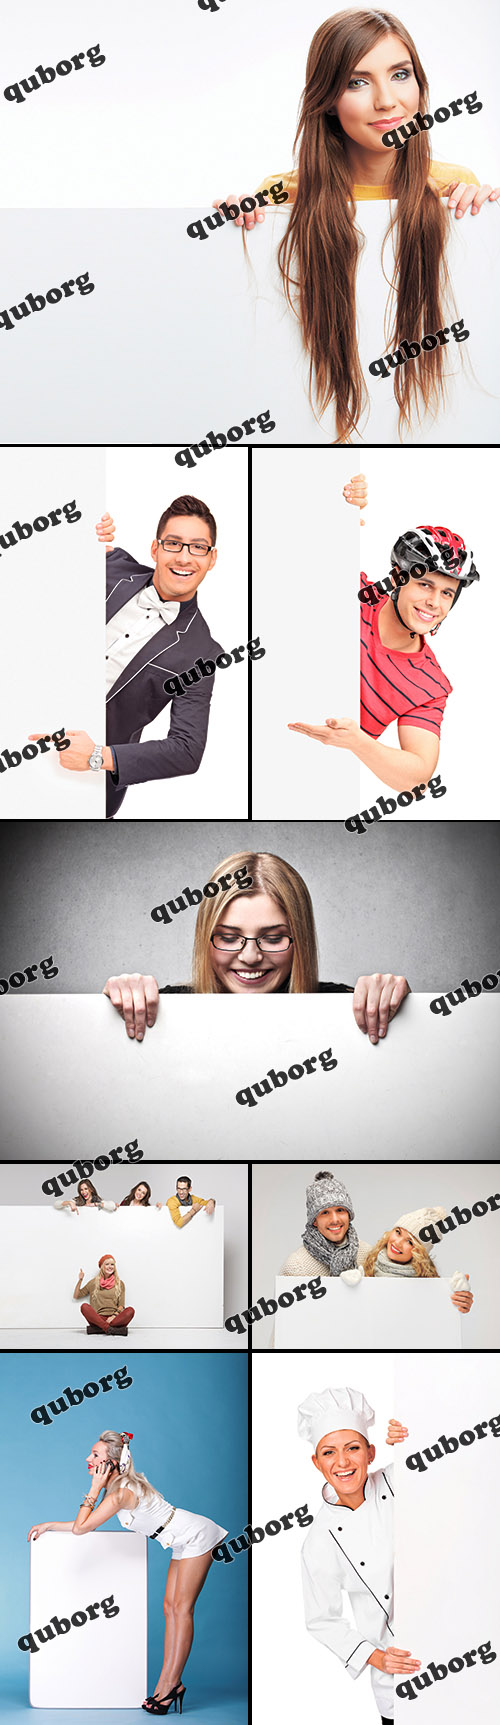 Stock Photos - People with Billboards